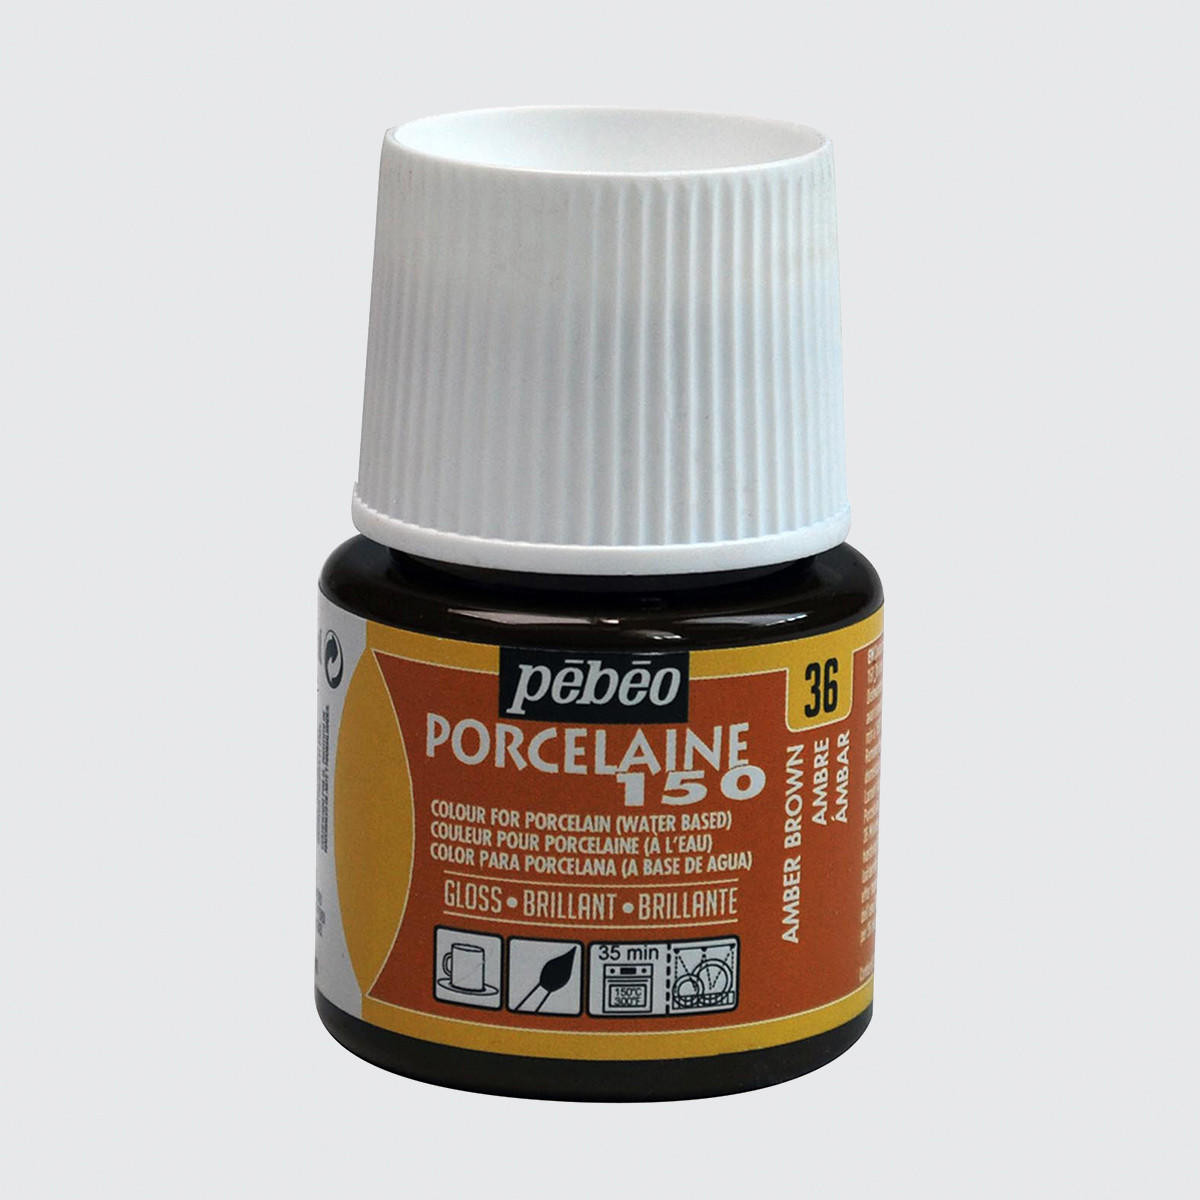 Pebeo Porcelaine 150 Paint 45ml Amber Brown